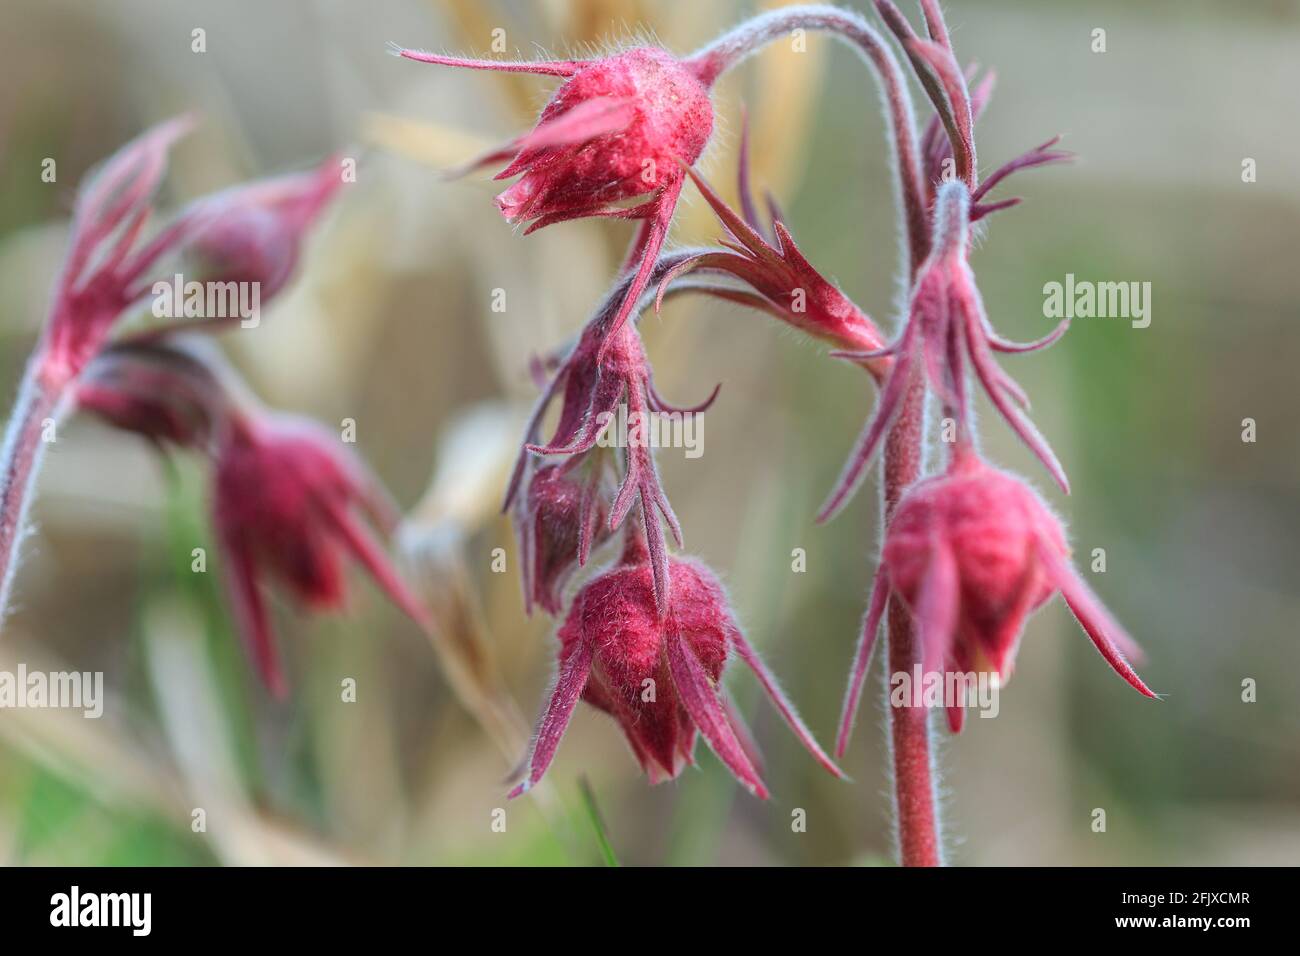 AKA: three-flowered avens, or old man's whiskers  Walking Iron County Park  April 24th 2021 Stock Photo